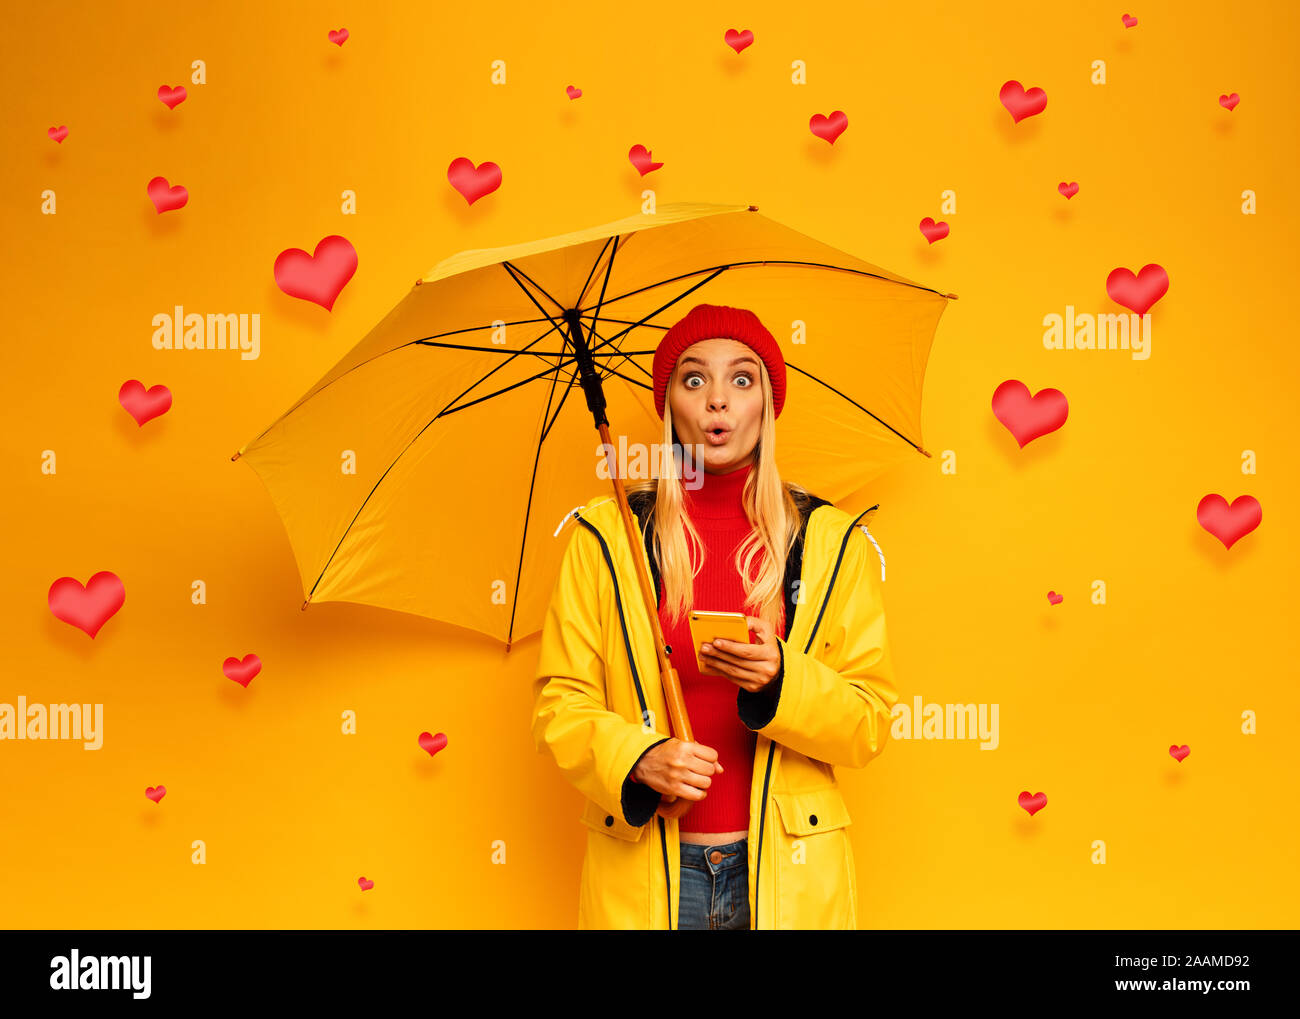 Blonde cute girl protects herself with umbrella due to rain of hearts on her smartphone. happy and surprised expression face. background Stock Photo